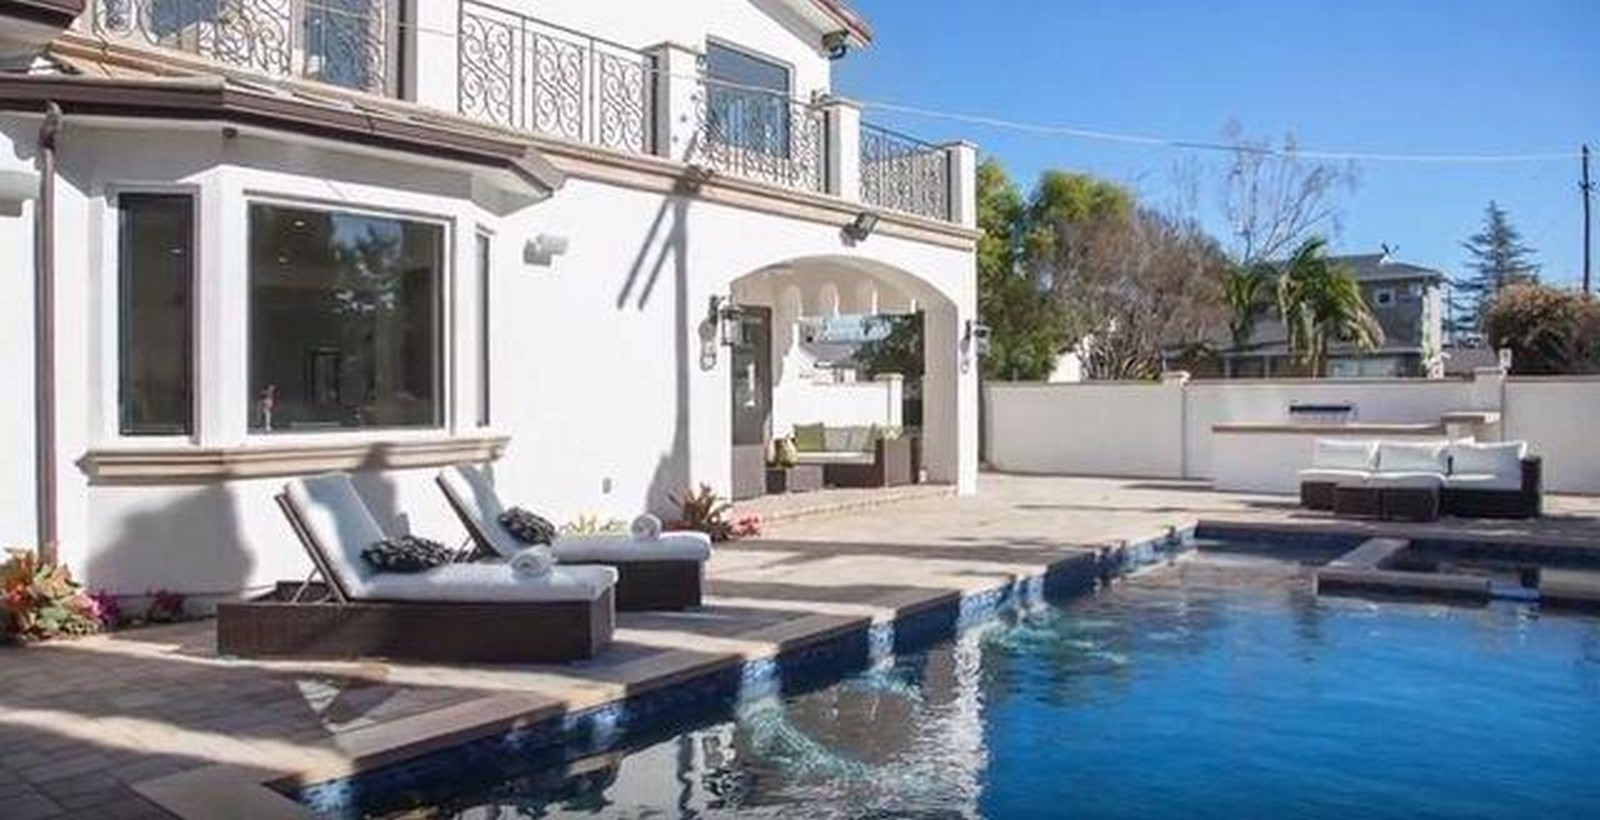 An inside look at the houses owned by Michael B. Jordan - Sheet3